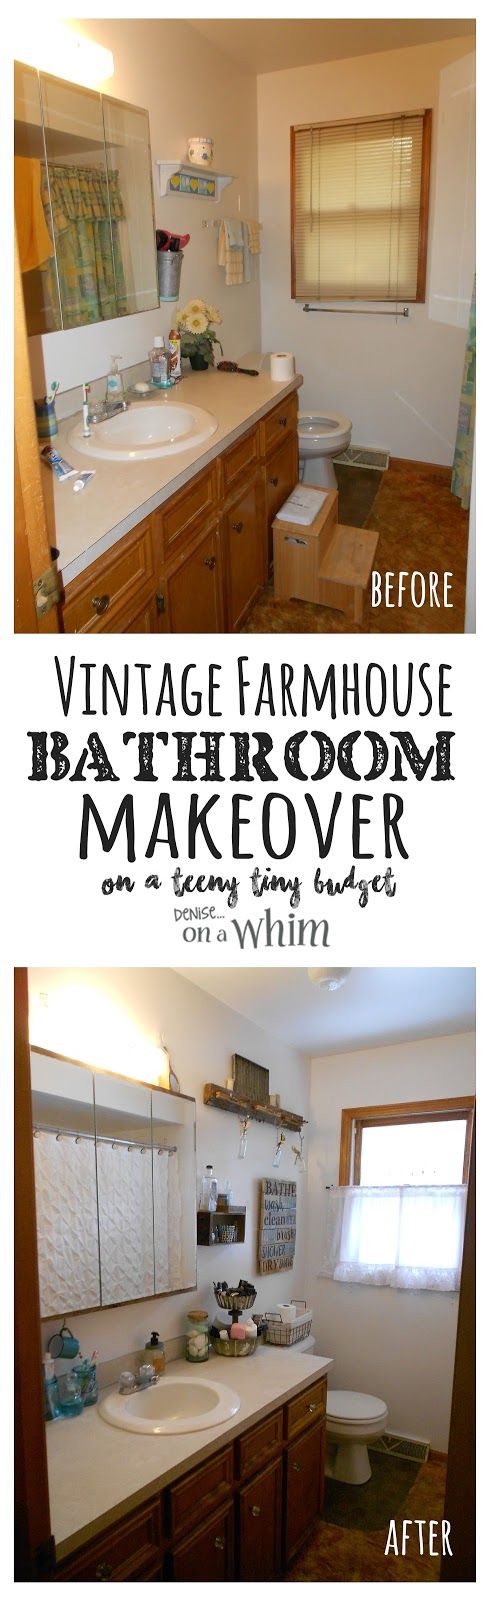 Vintage Farmhouse Bathroom Makeover - the Before and After | Denise on a Whim